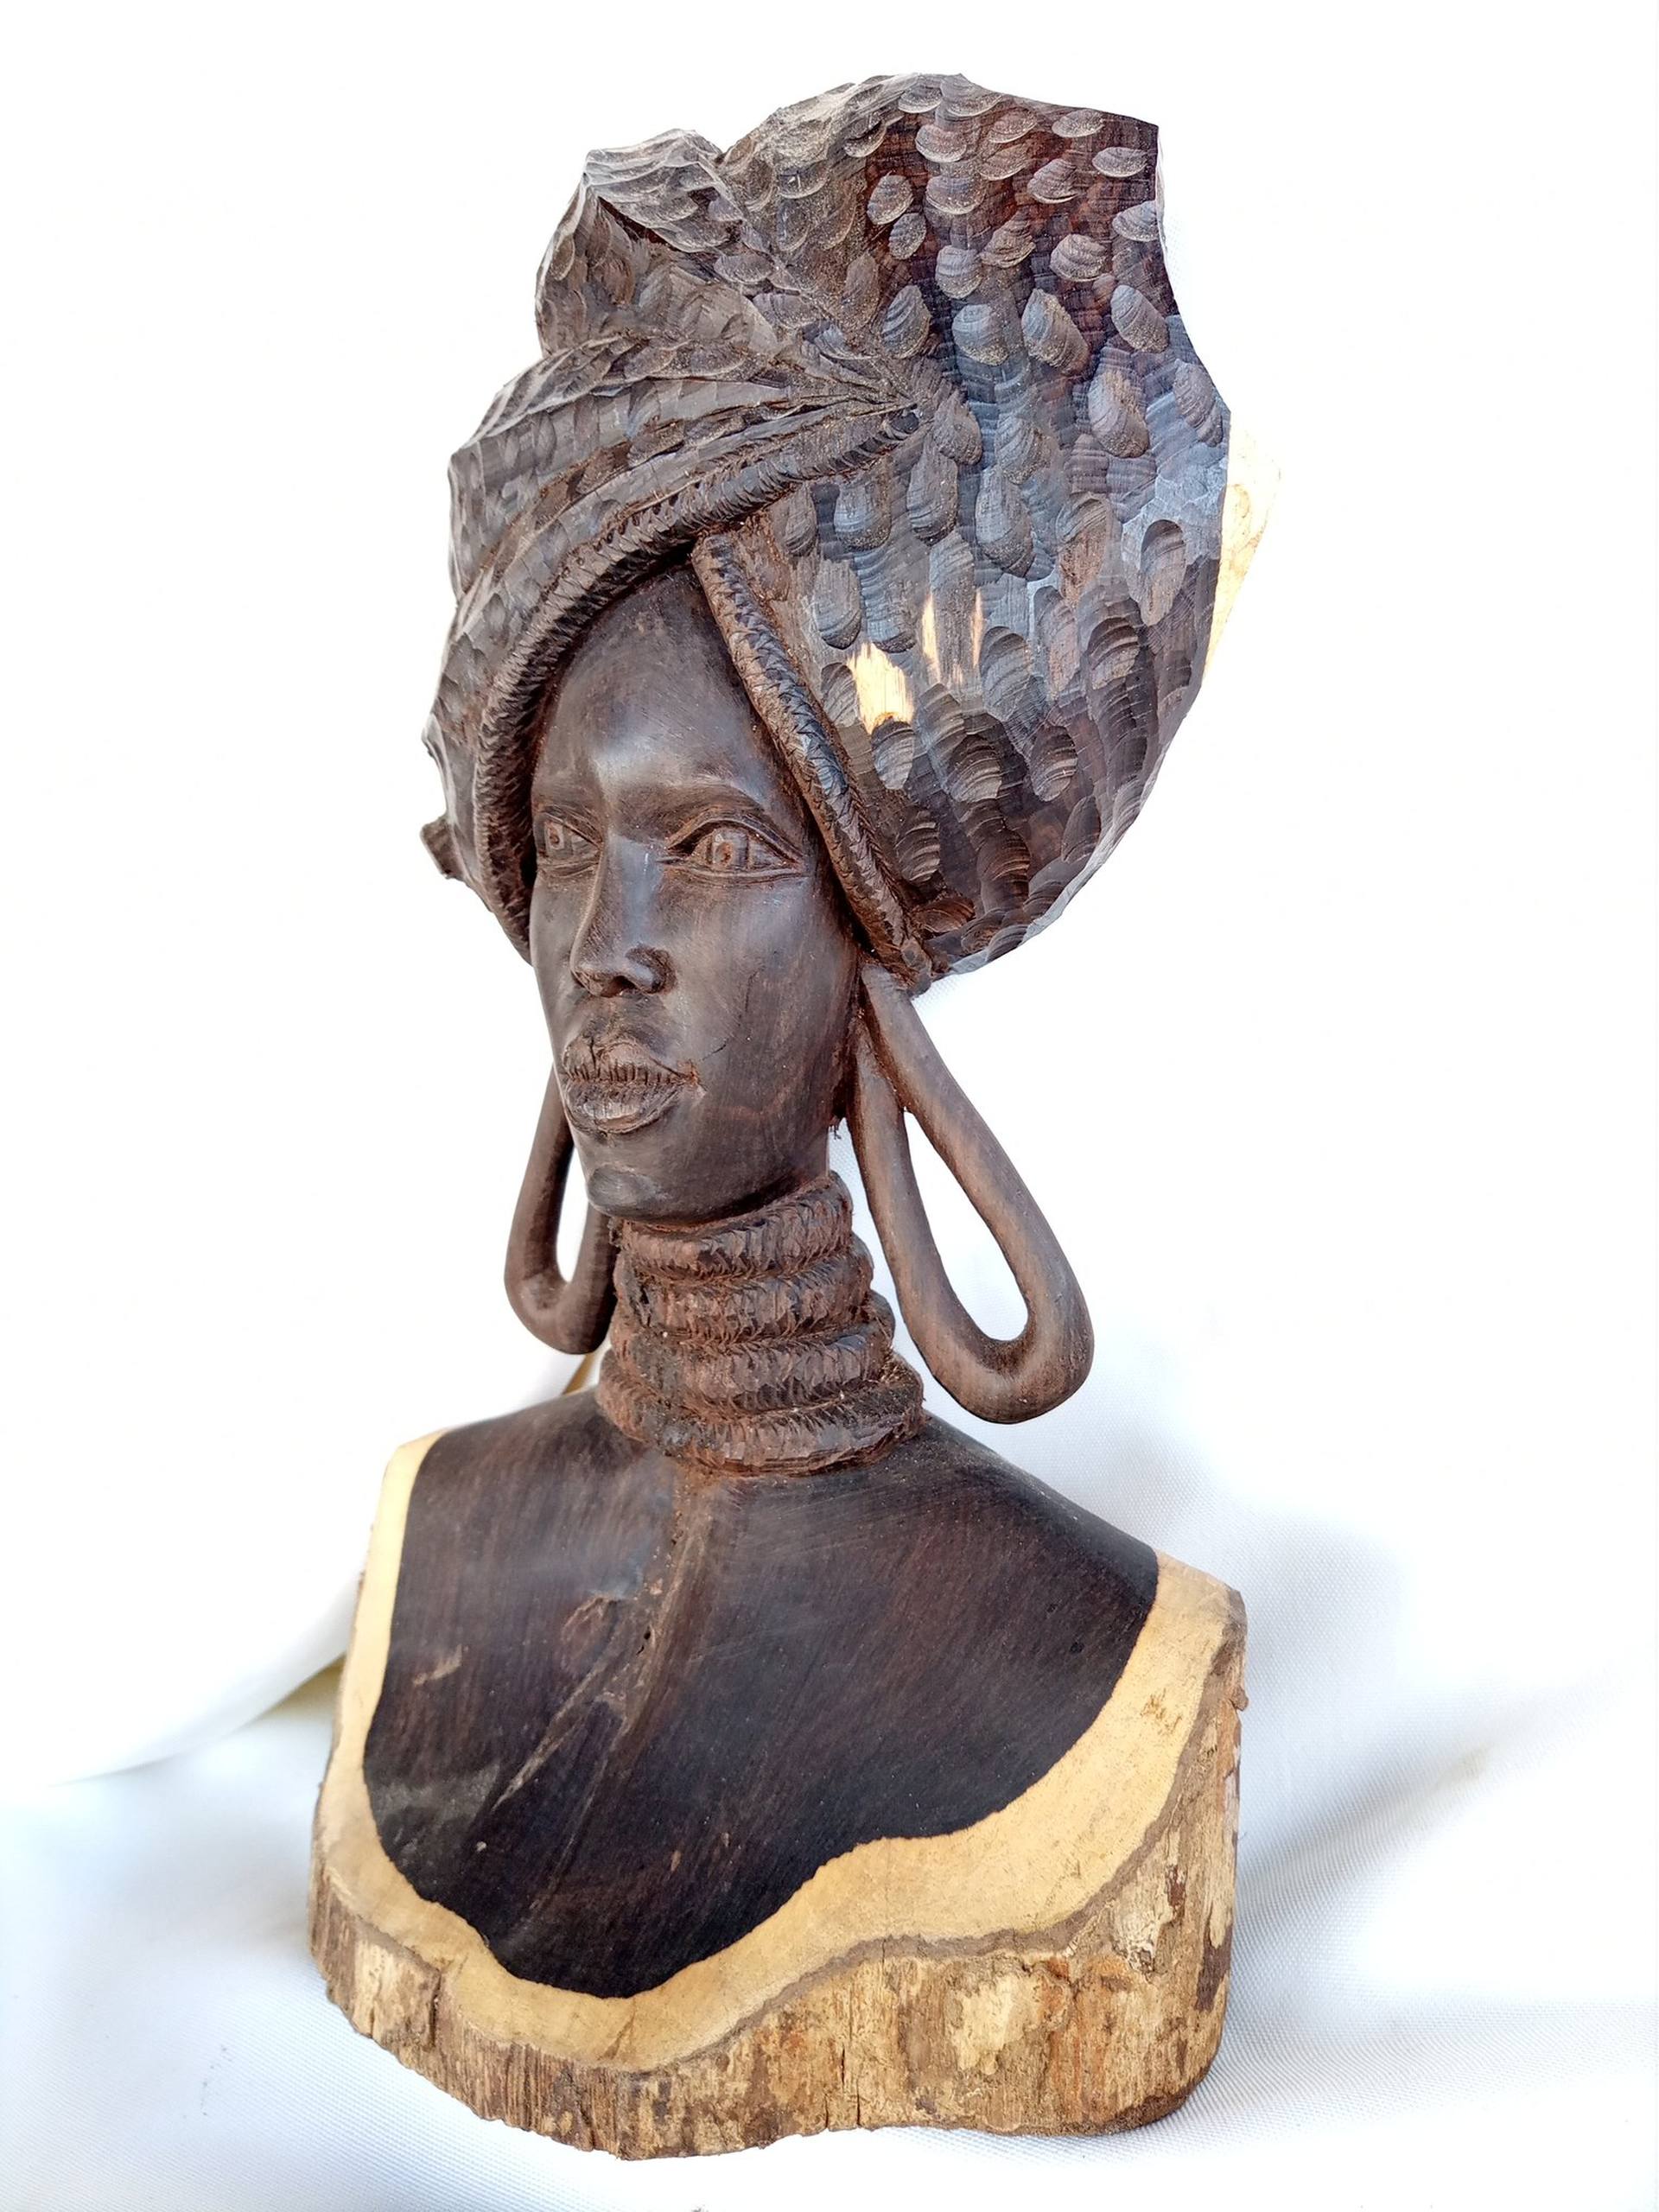 African woman sandalwood wood sculpture by Jafeth Moiane (2020